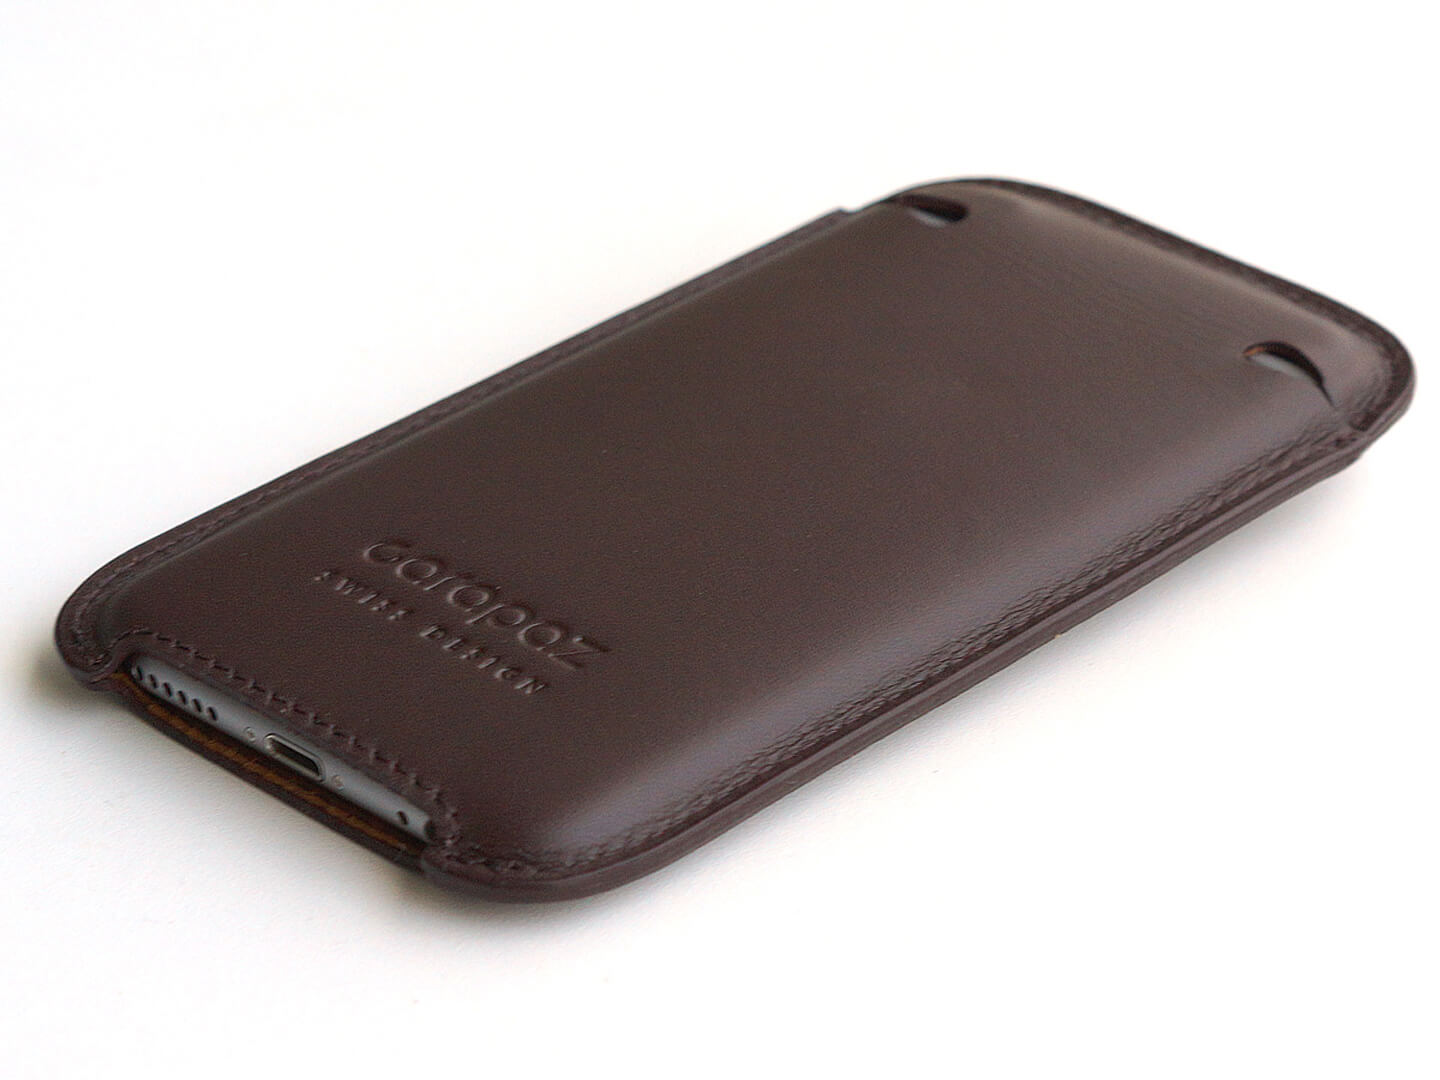 Slim Design Leather Pouch iPhone 6 / 7 / 8 Plus - brown - Carapaz